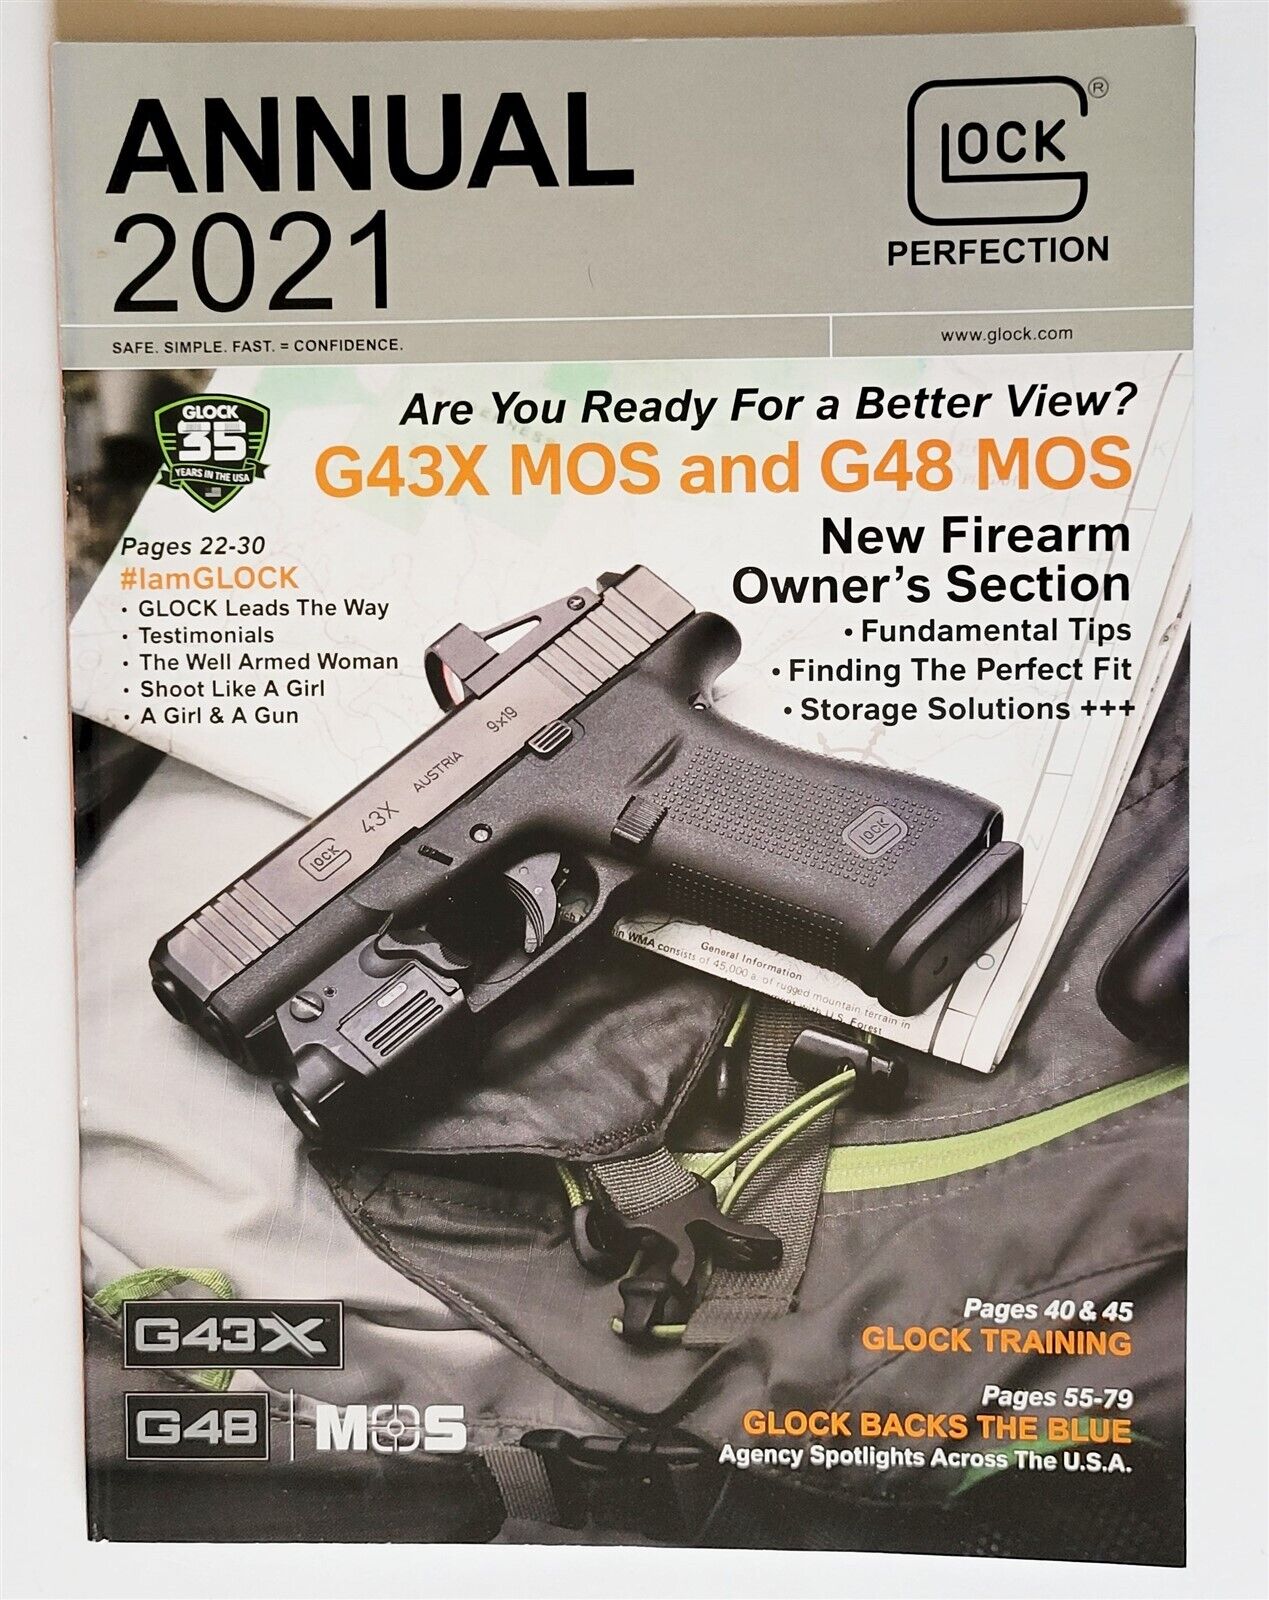 Glock Perfection Annual 2021 Magazine 91 Pages Military Firearms